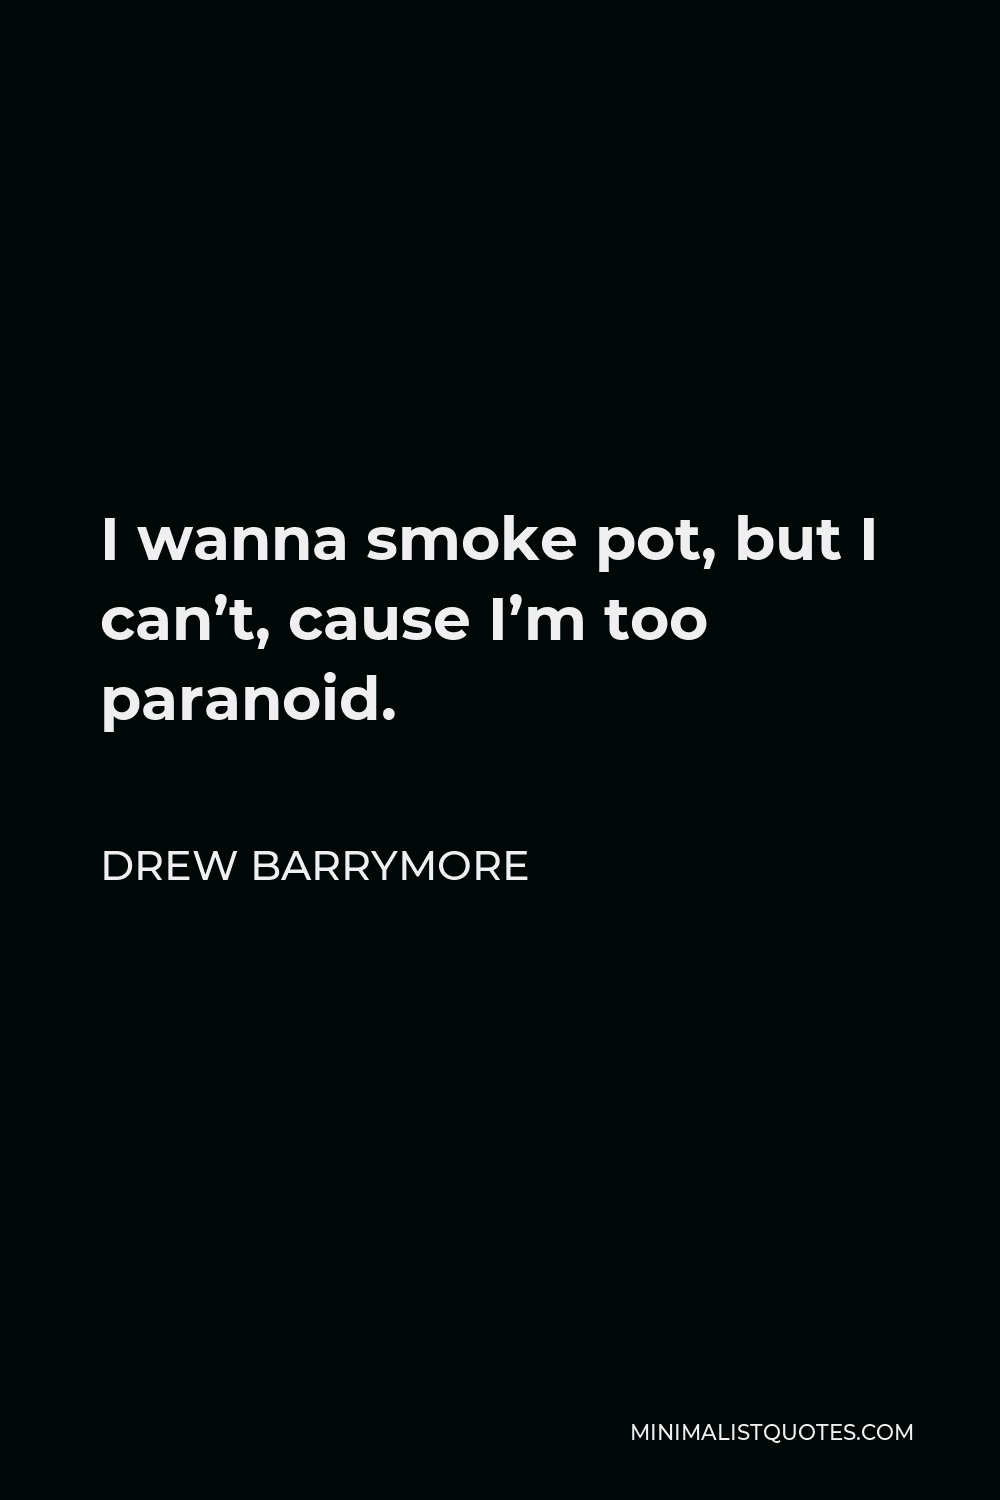 Drew Barrymore Quote - I wanna smoke pot, but I can’t, cause I’m too paranoid.